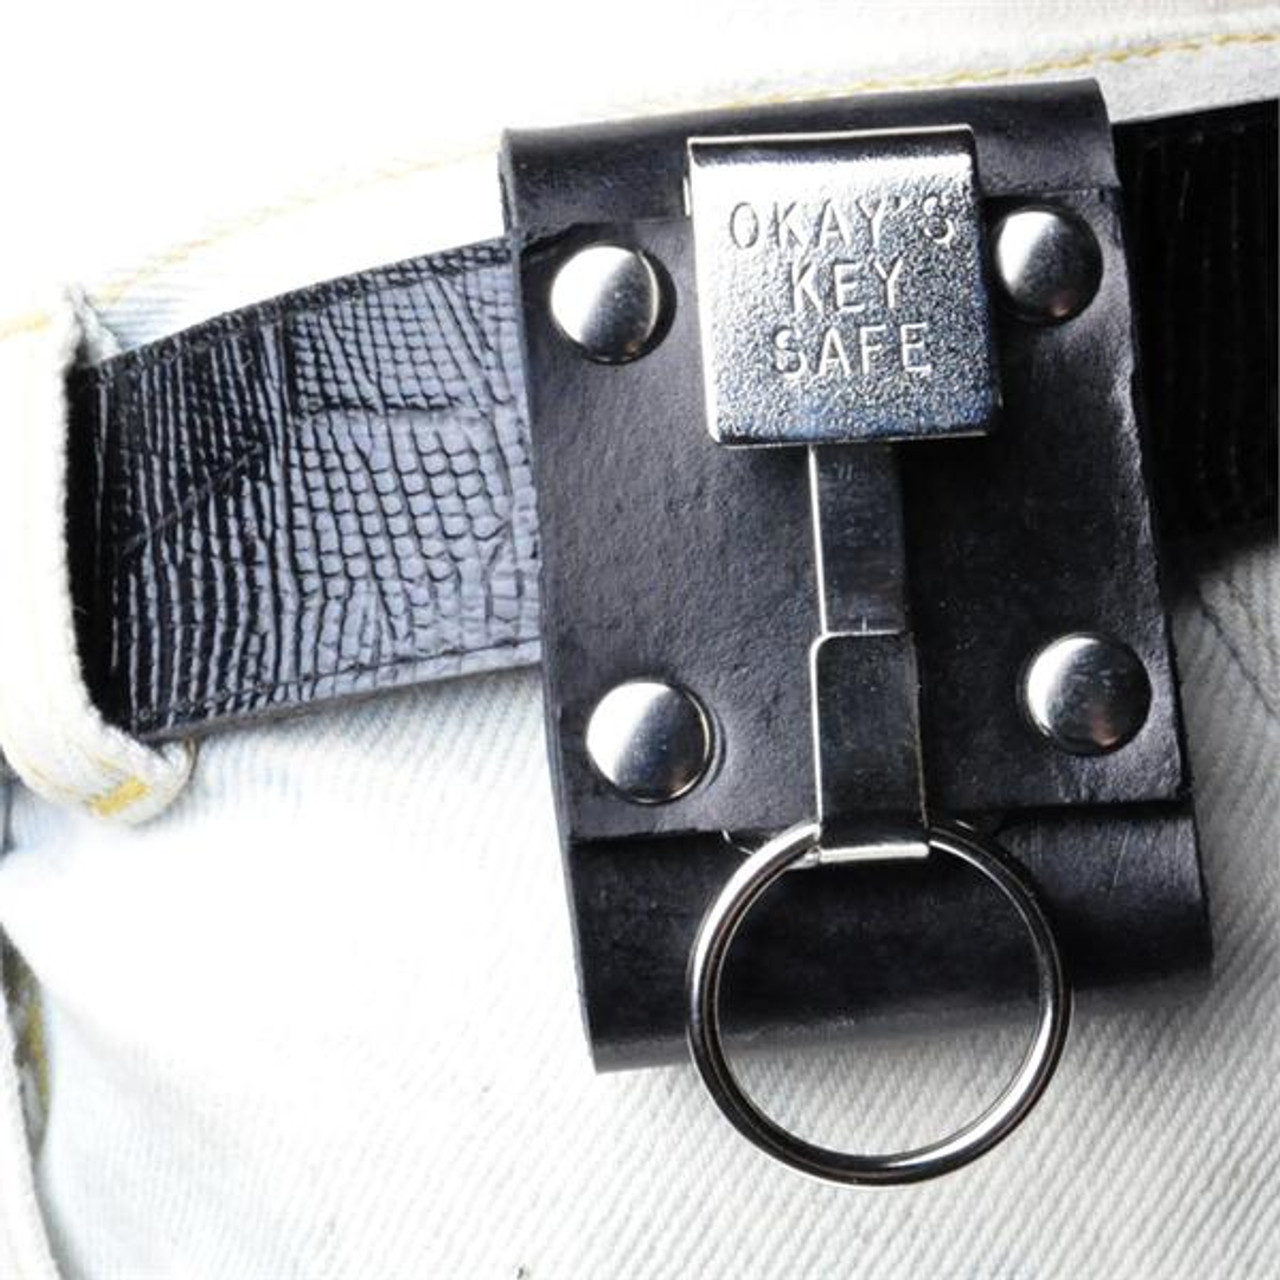 Shop for and Buy Okays Ultimate Key Keyper Nickel Plated Single Key Safe  Belt Key Holder at . Large selection and bulk discounts  available.